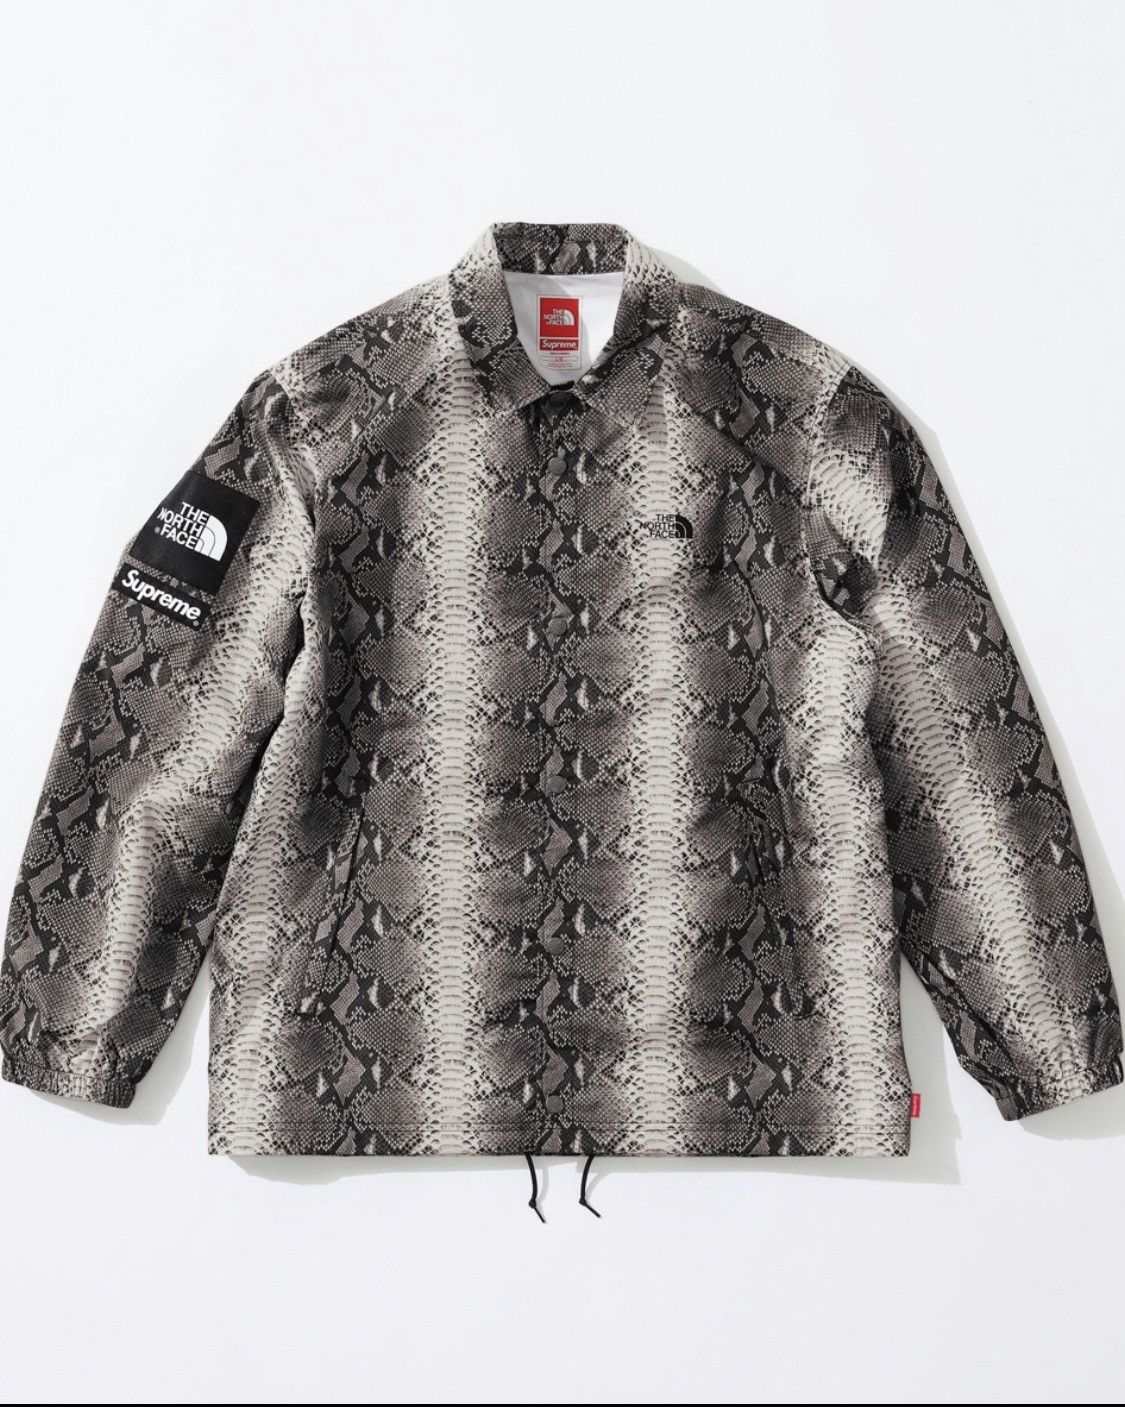 Supreme Supreme x The North Face Snakeskin Taped Seam Coaches Jacket |  Grailed